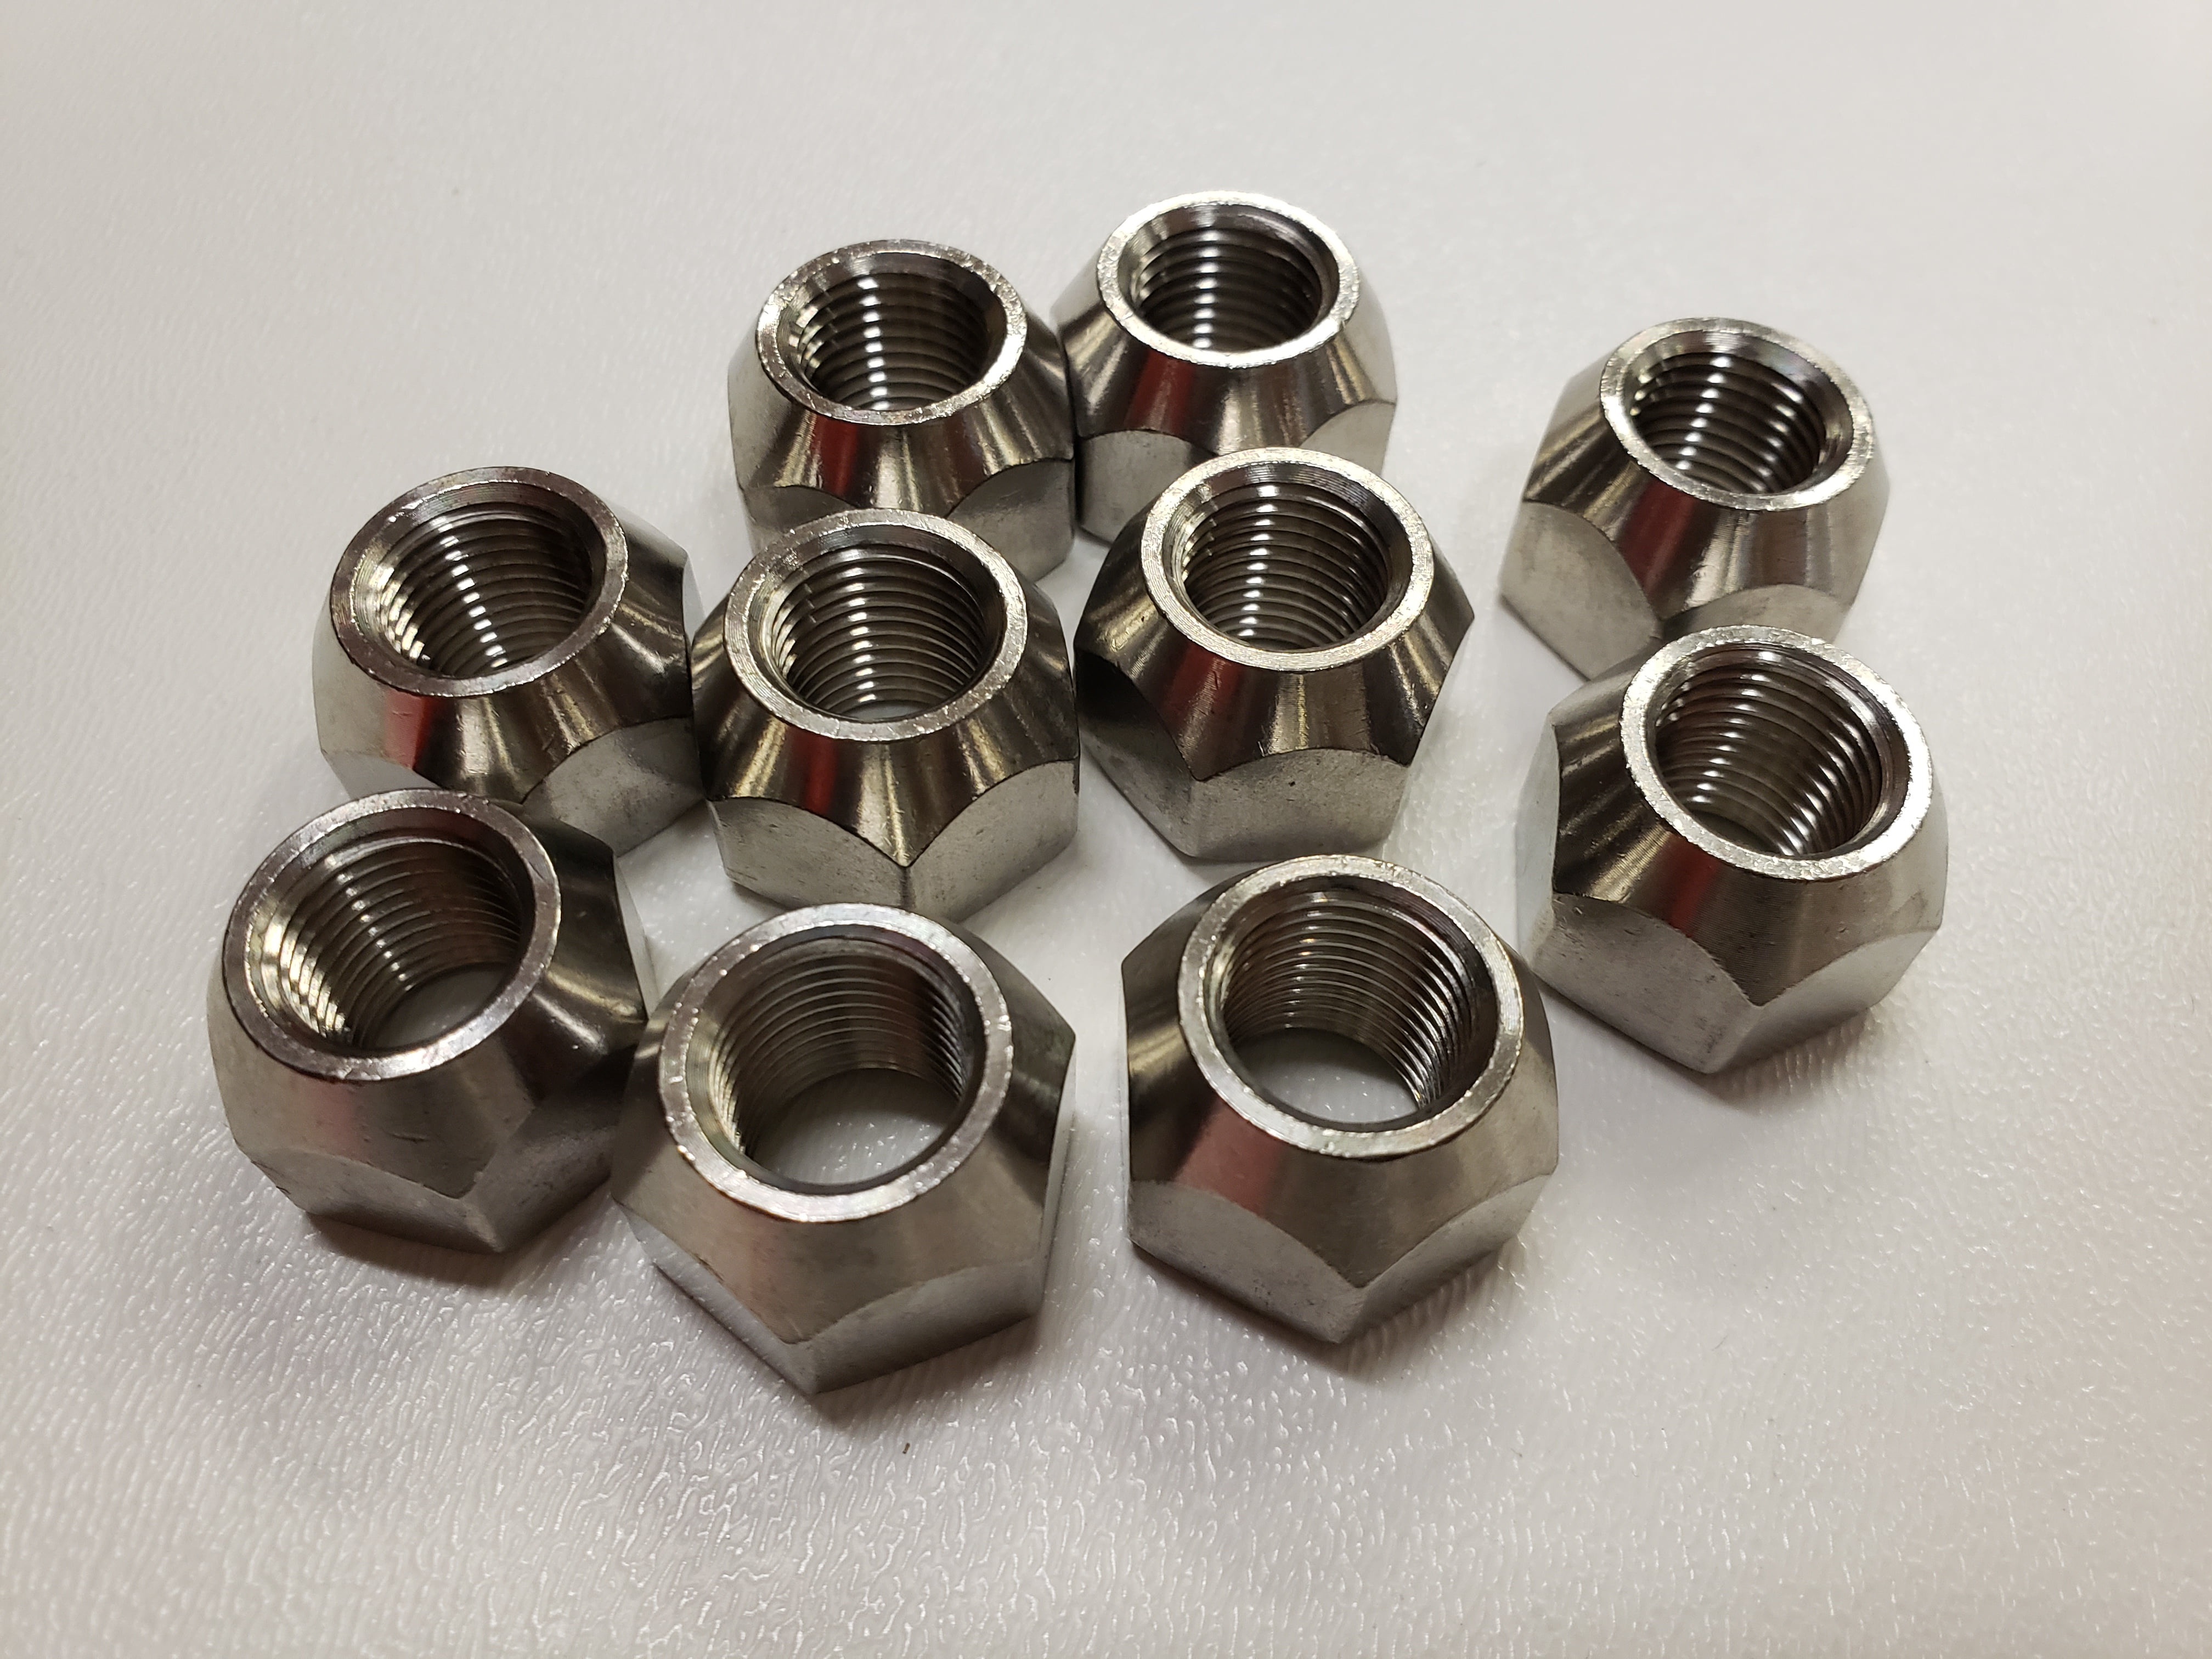 Ten (10) Pack Open 304 Stainless Steel 1/2-20 Lug Nuts For Trailer Stainless Steel Lug Nuts 1 2 X 20